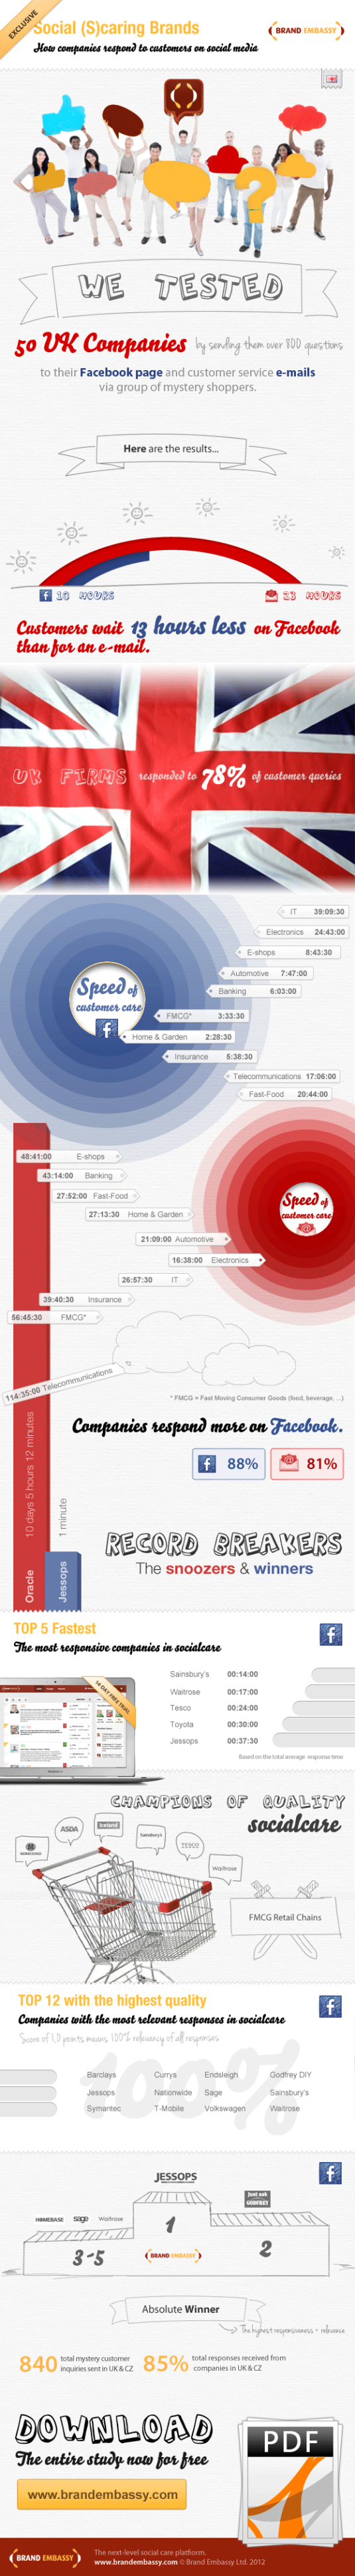 Companies Are More Responsive To Facebook Comments, Than Email Queries [INFOGRAPHIC]